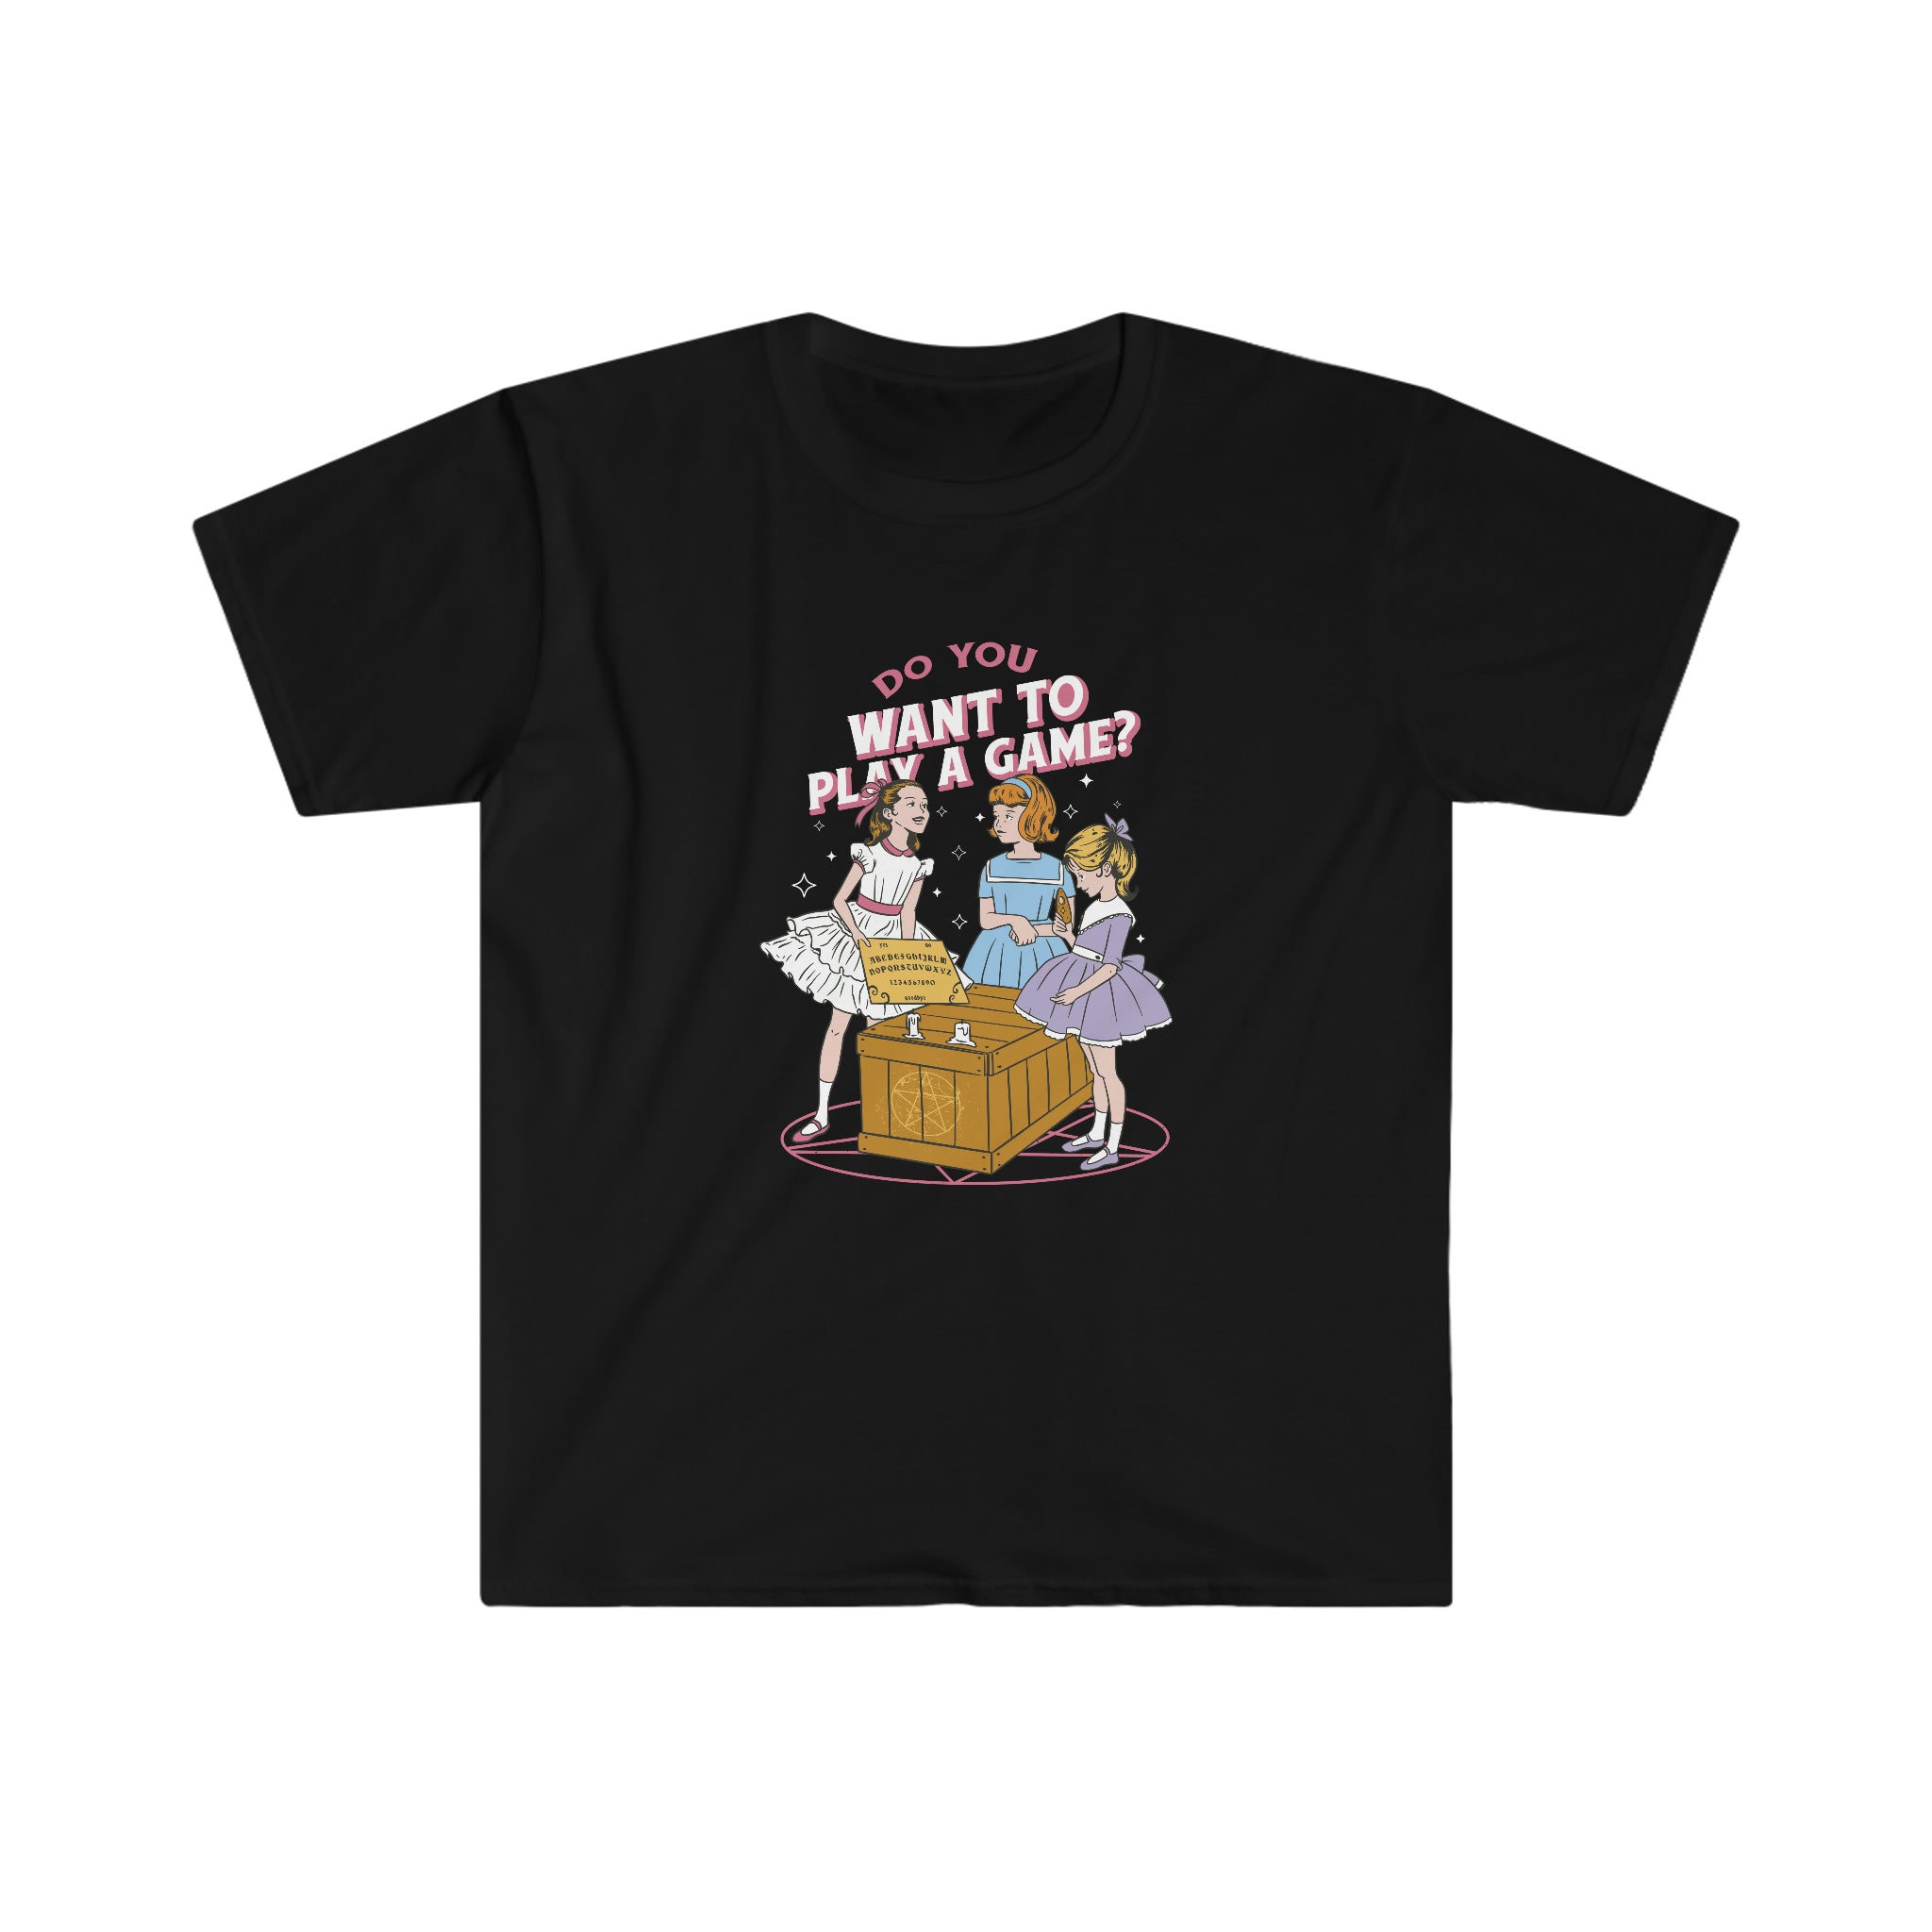 A Do You Want to Play a Game? T-shirt with a cartoon of two girls playing in a box.